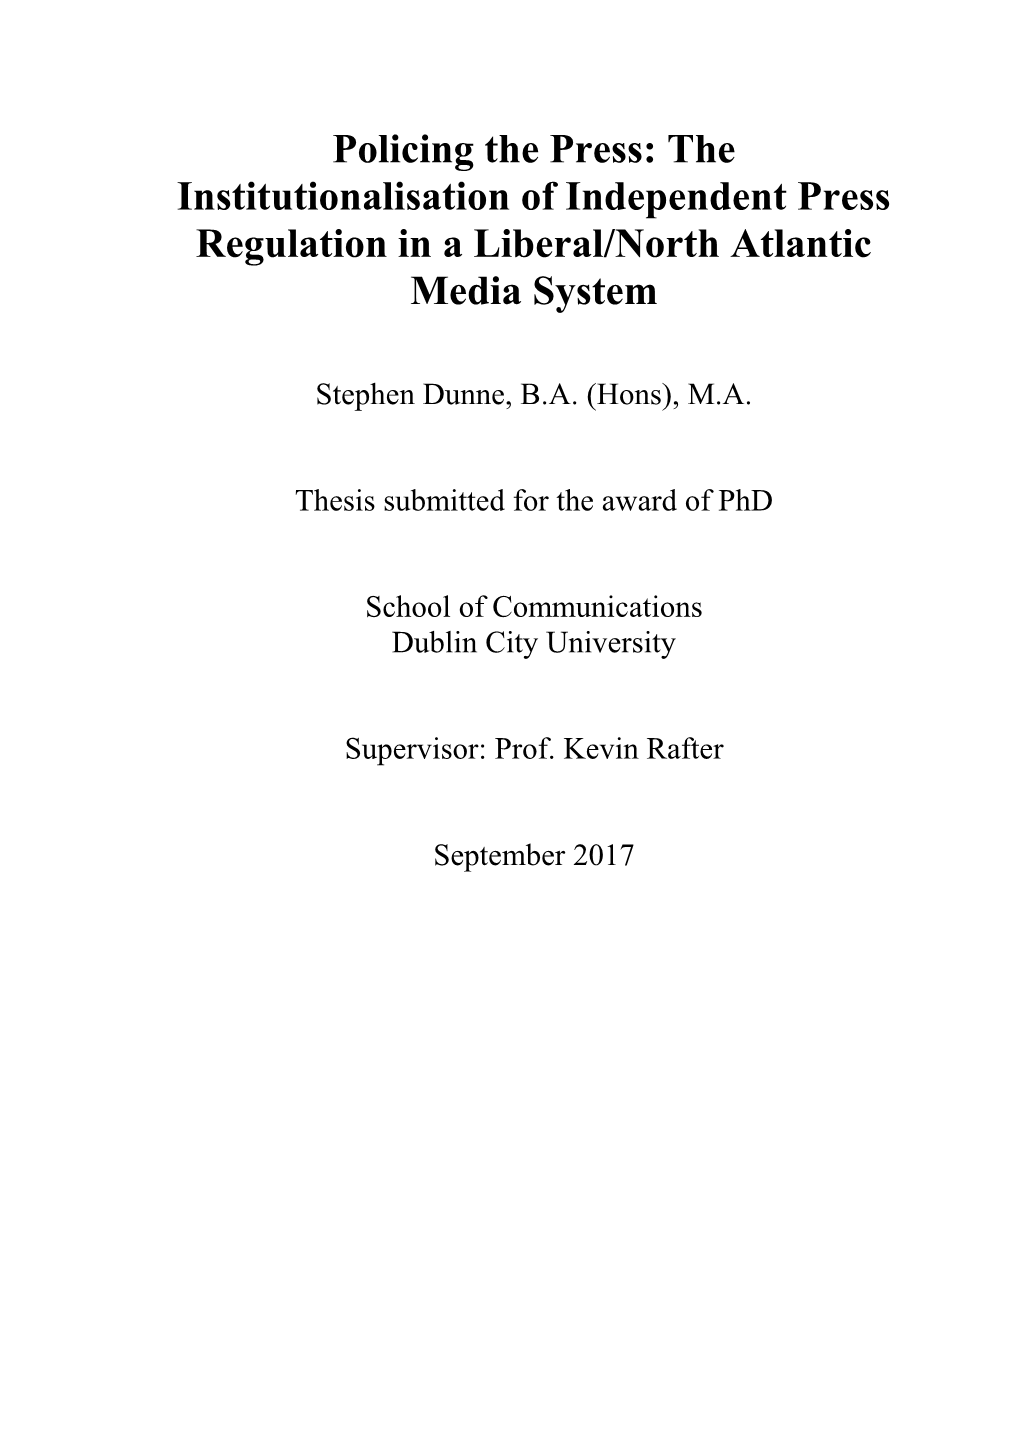 The Institutionalisation of Independent Press Regulation in a Liberal/North Atlantic Media System